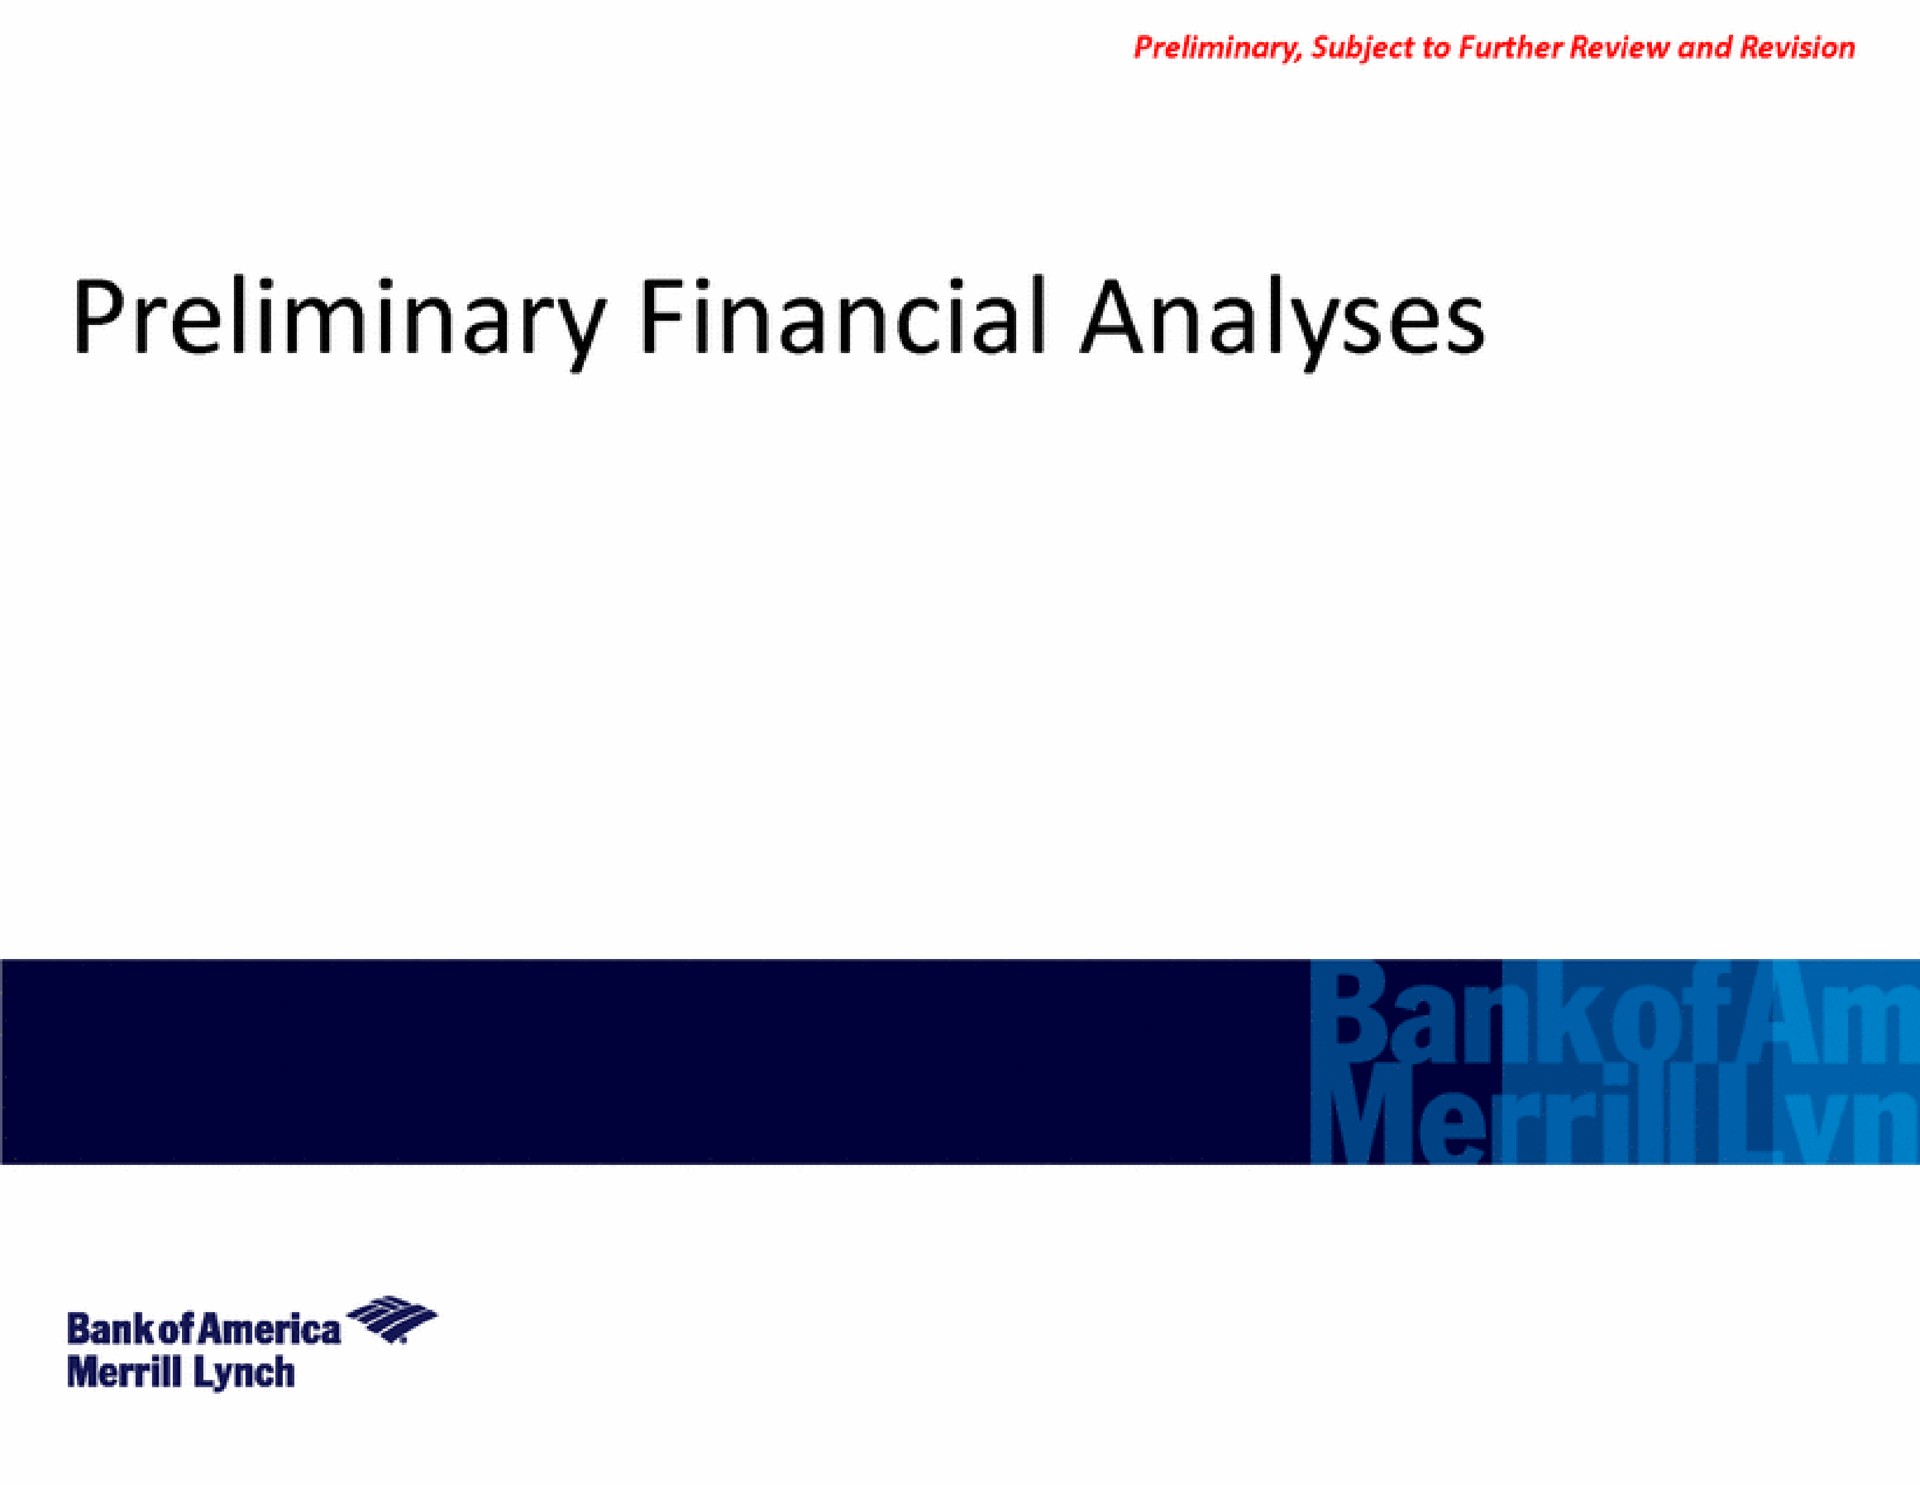 preliminary financial analyses bank of lynch | Bank of America